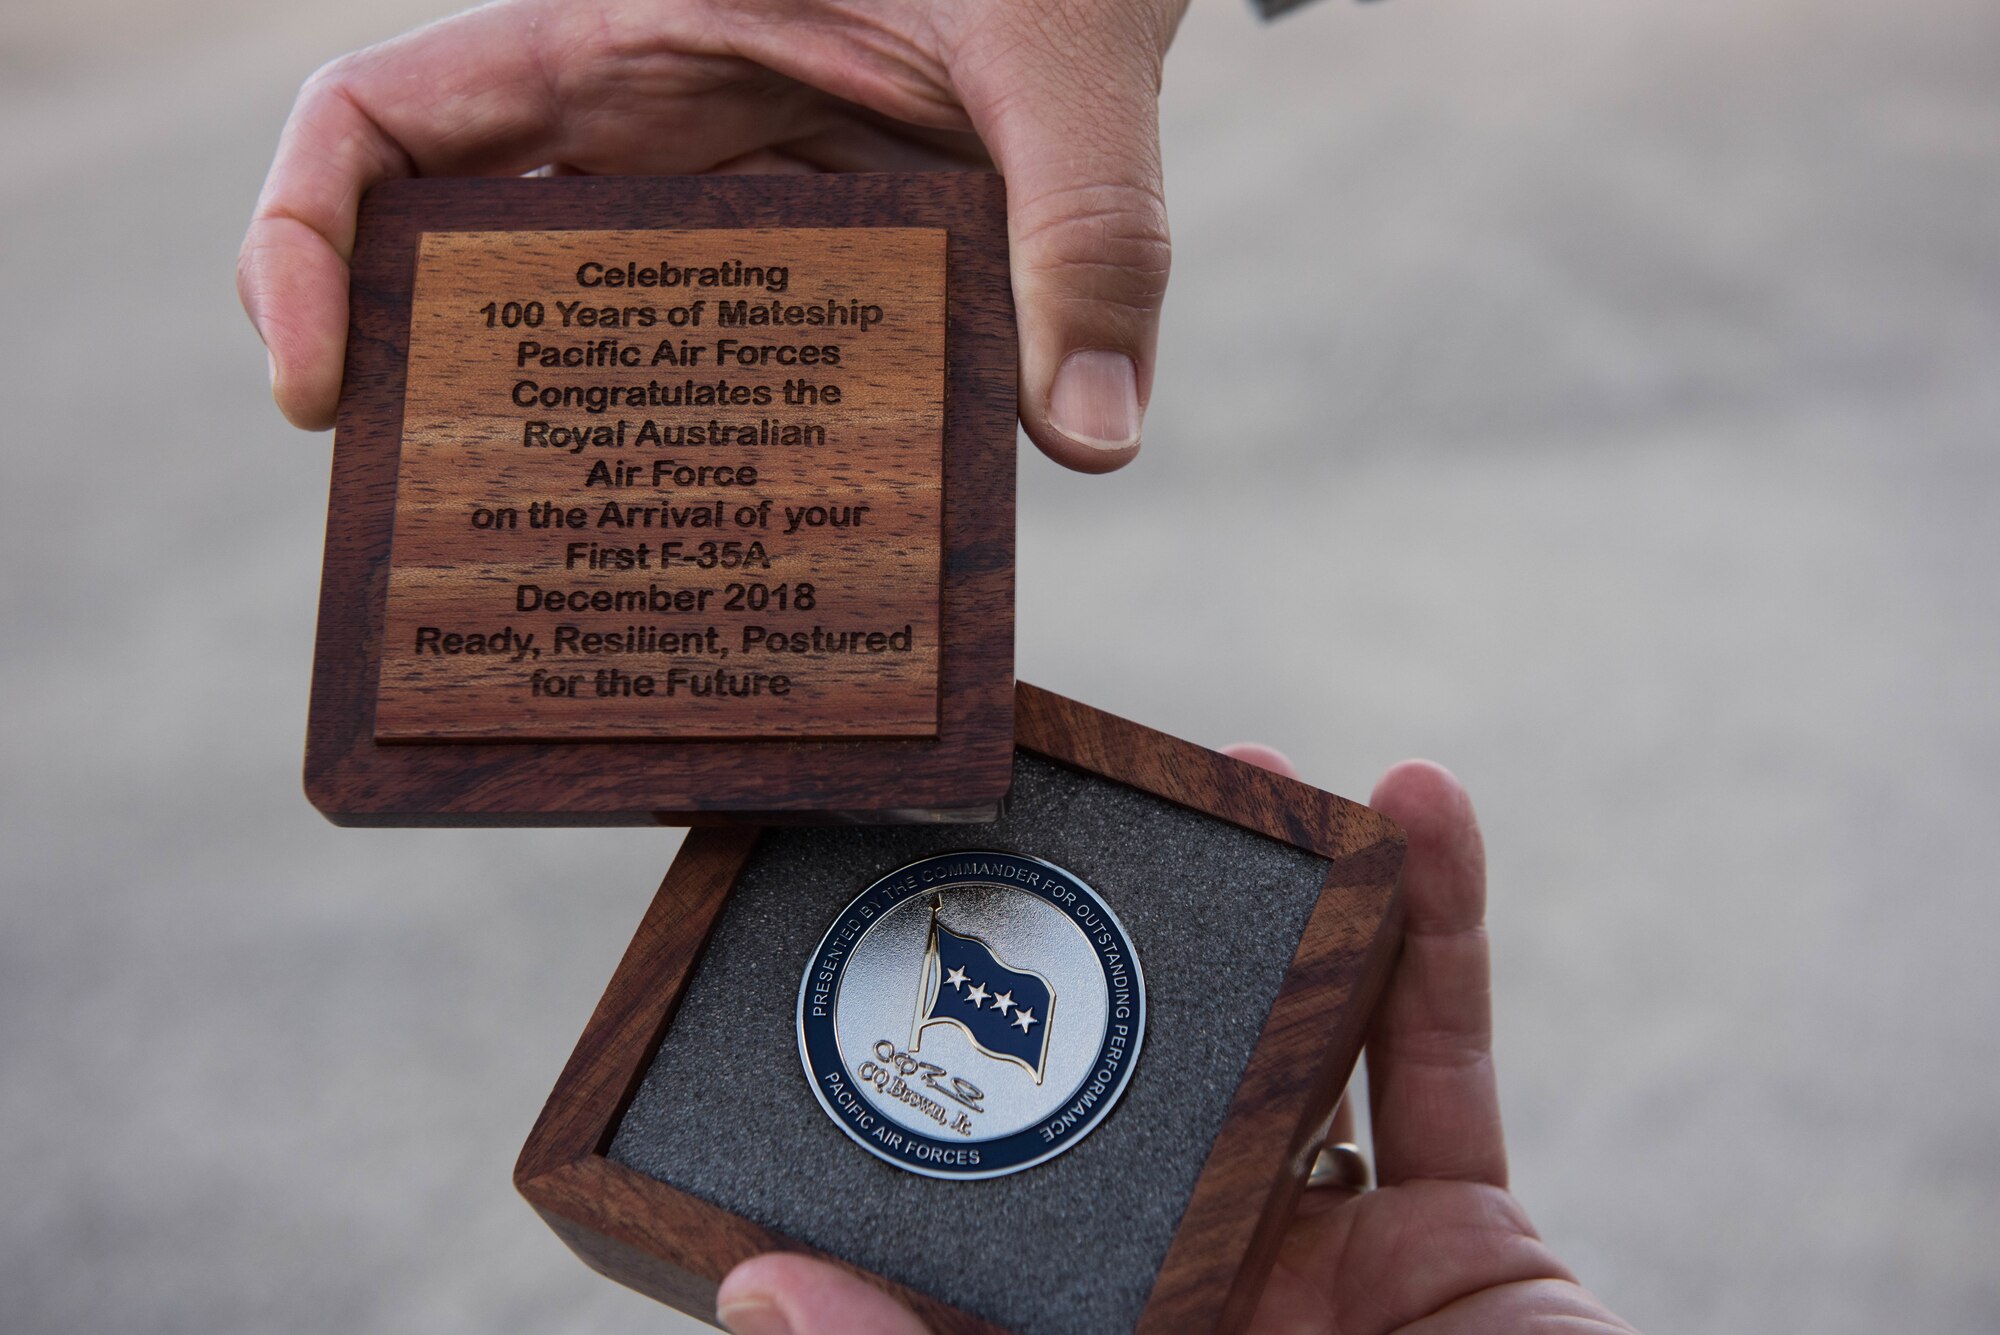 The coin to be presented to Royal Australian Air Force Air Marshal Leo Davies, Chief of Air Force, on behalf of U.S. Air Force Gen. CQ Brown, Jr., Pacific Air Forces commander.